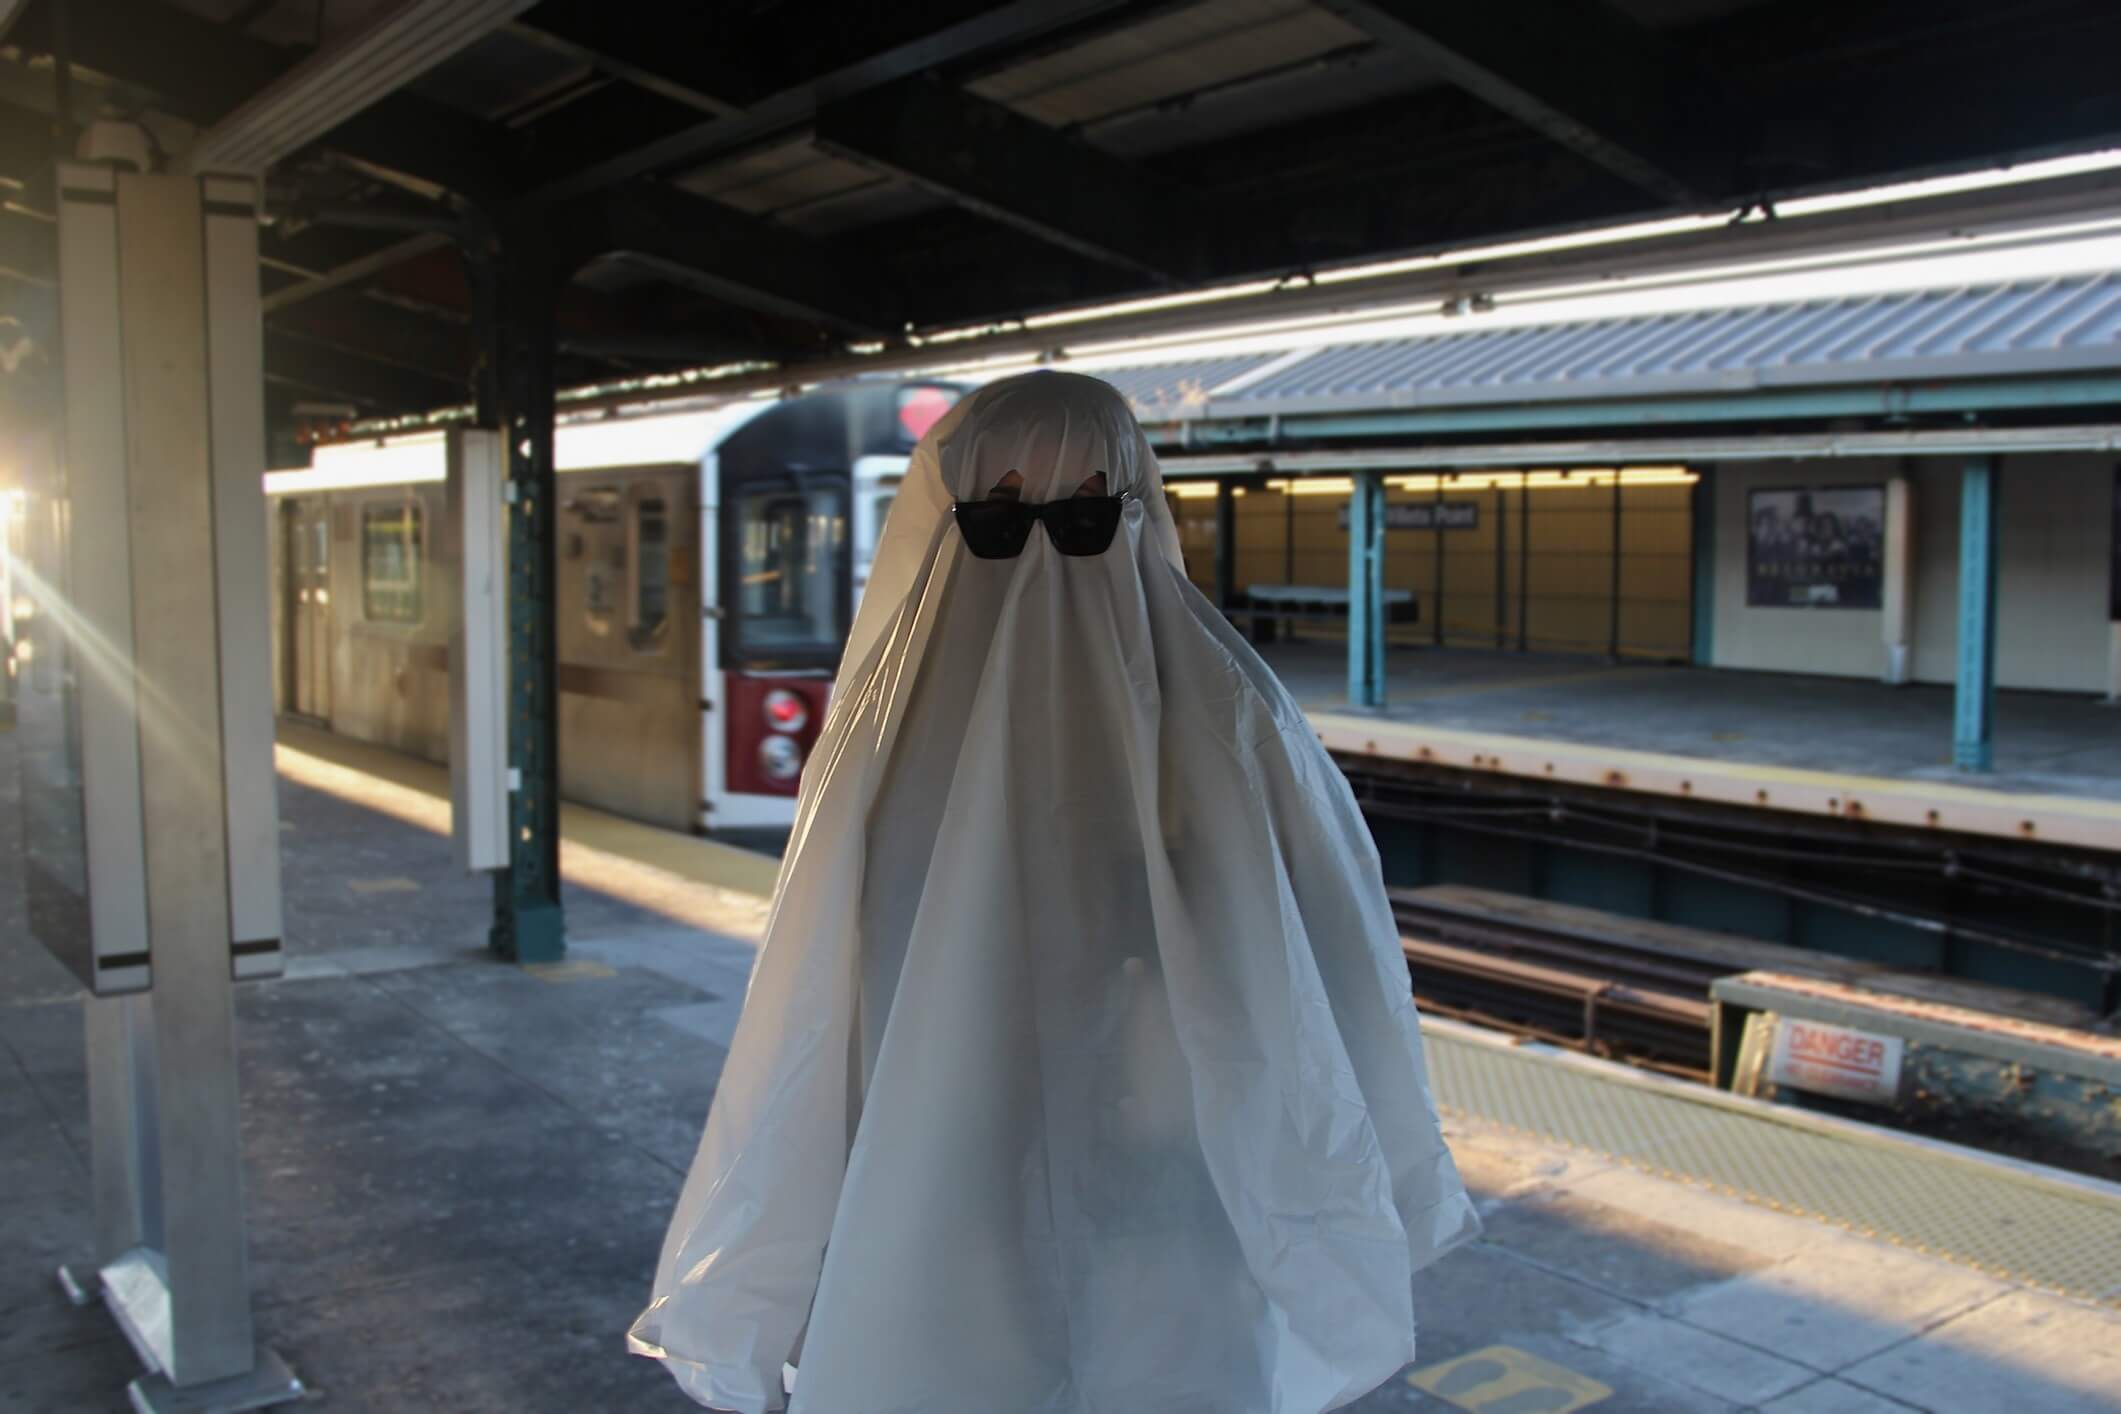 Halloween weekend was such a disaster that the Hamptons Subway must now hire people pushers to keep things running smoothly on future holiday weekends.